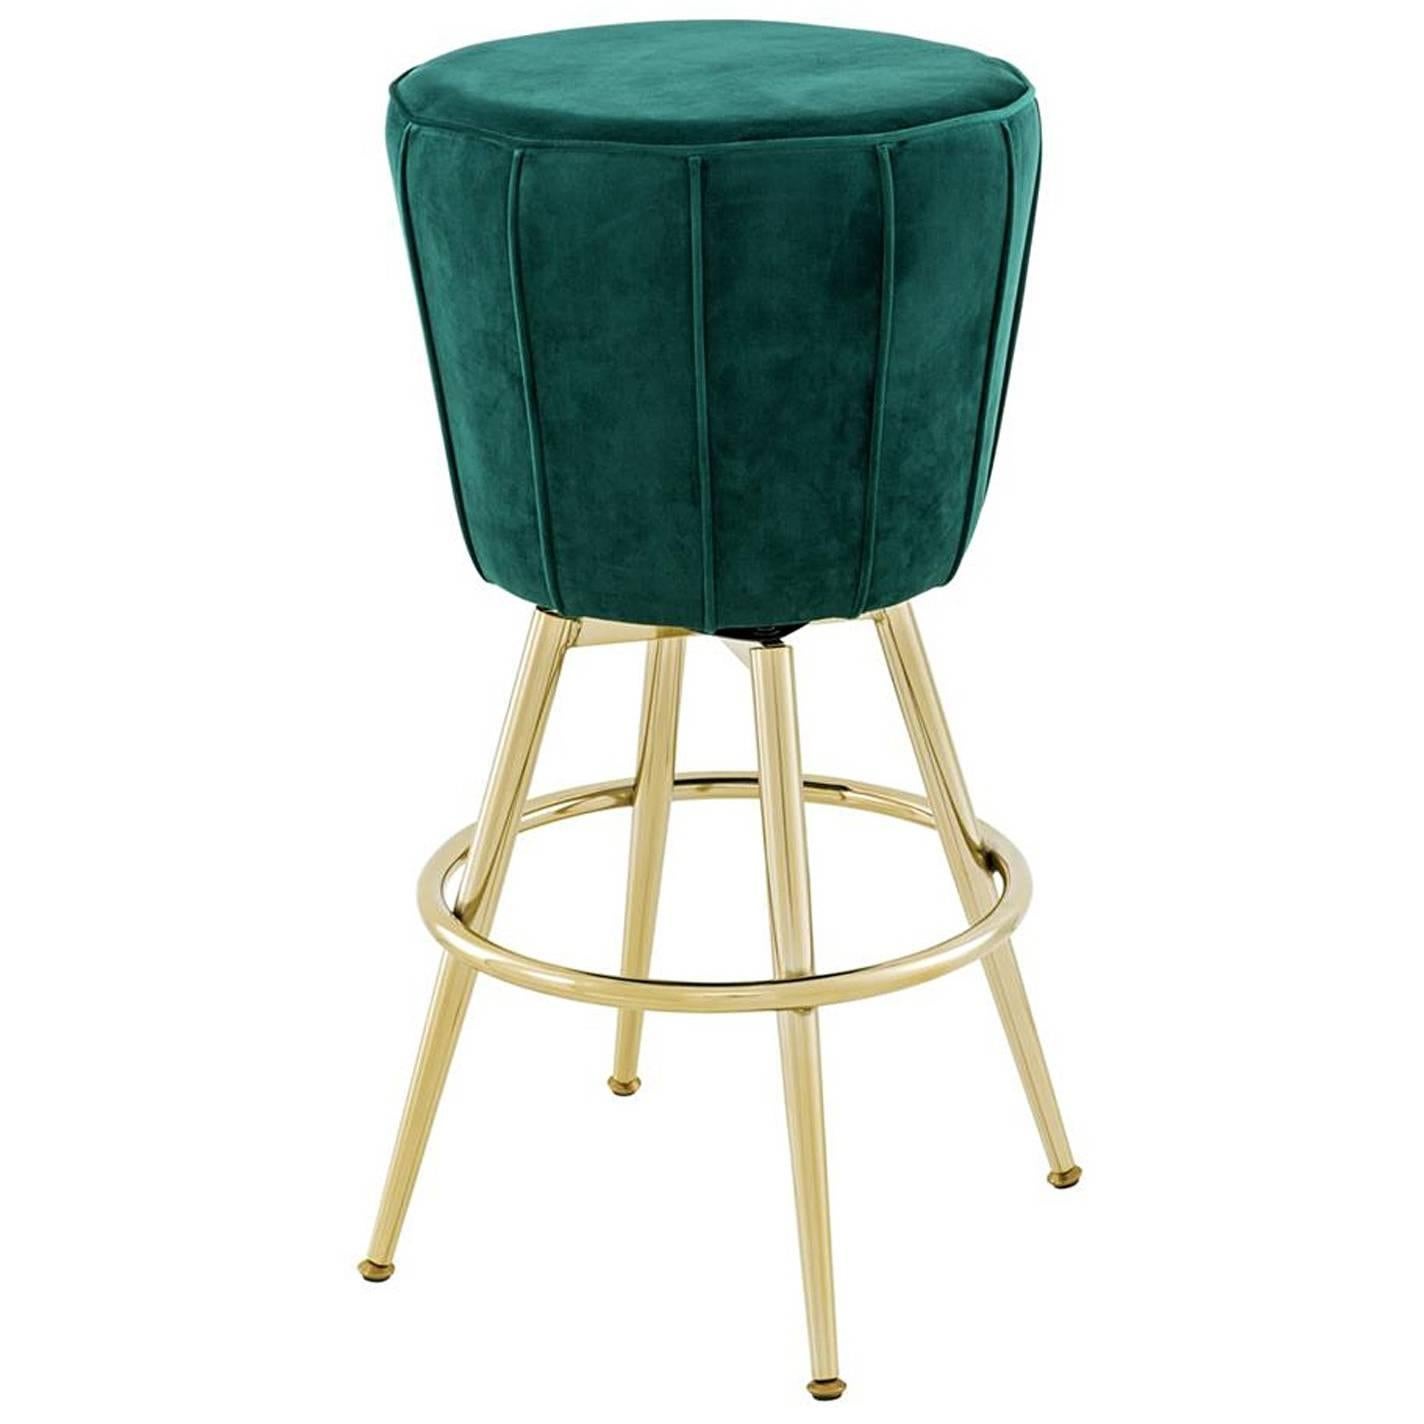 Saloon Stool in Green Velvet Fabric and Champagne Gold Finish